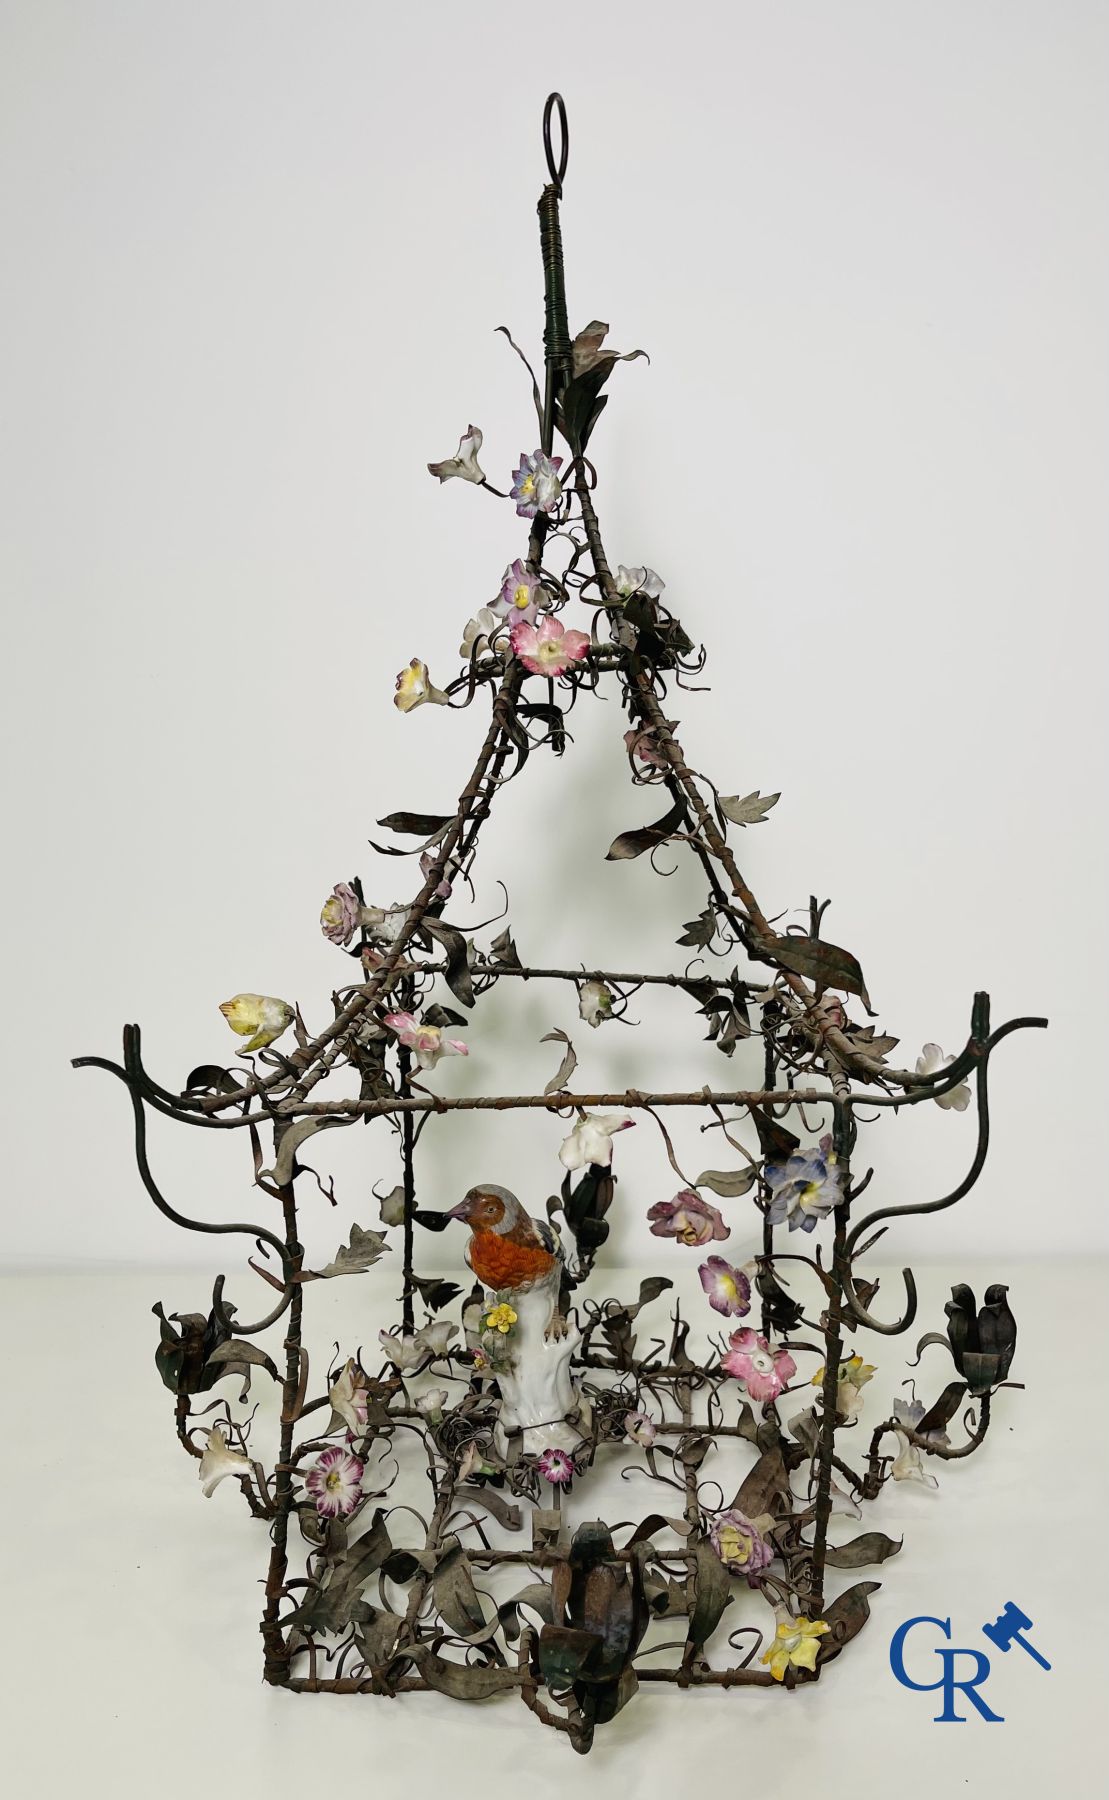 Chandelier with porcelain flowers and a bird in the manner of Meissen or Sèvres. 19th century. - Image 6 of 11